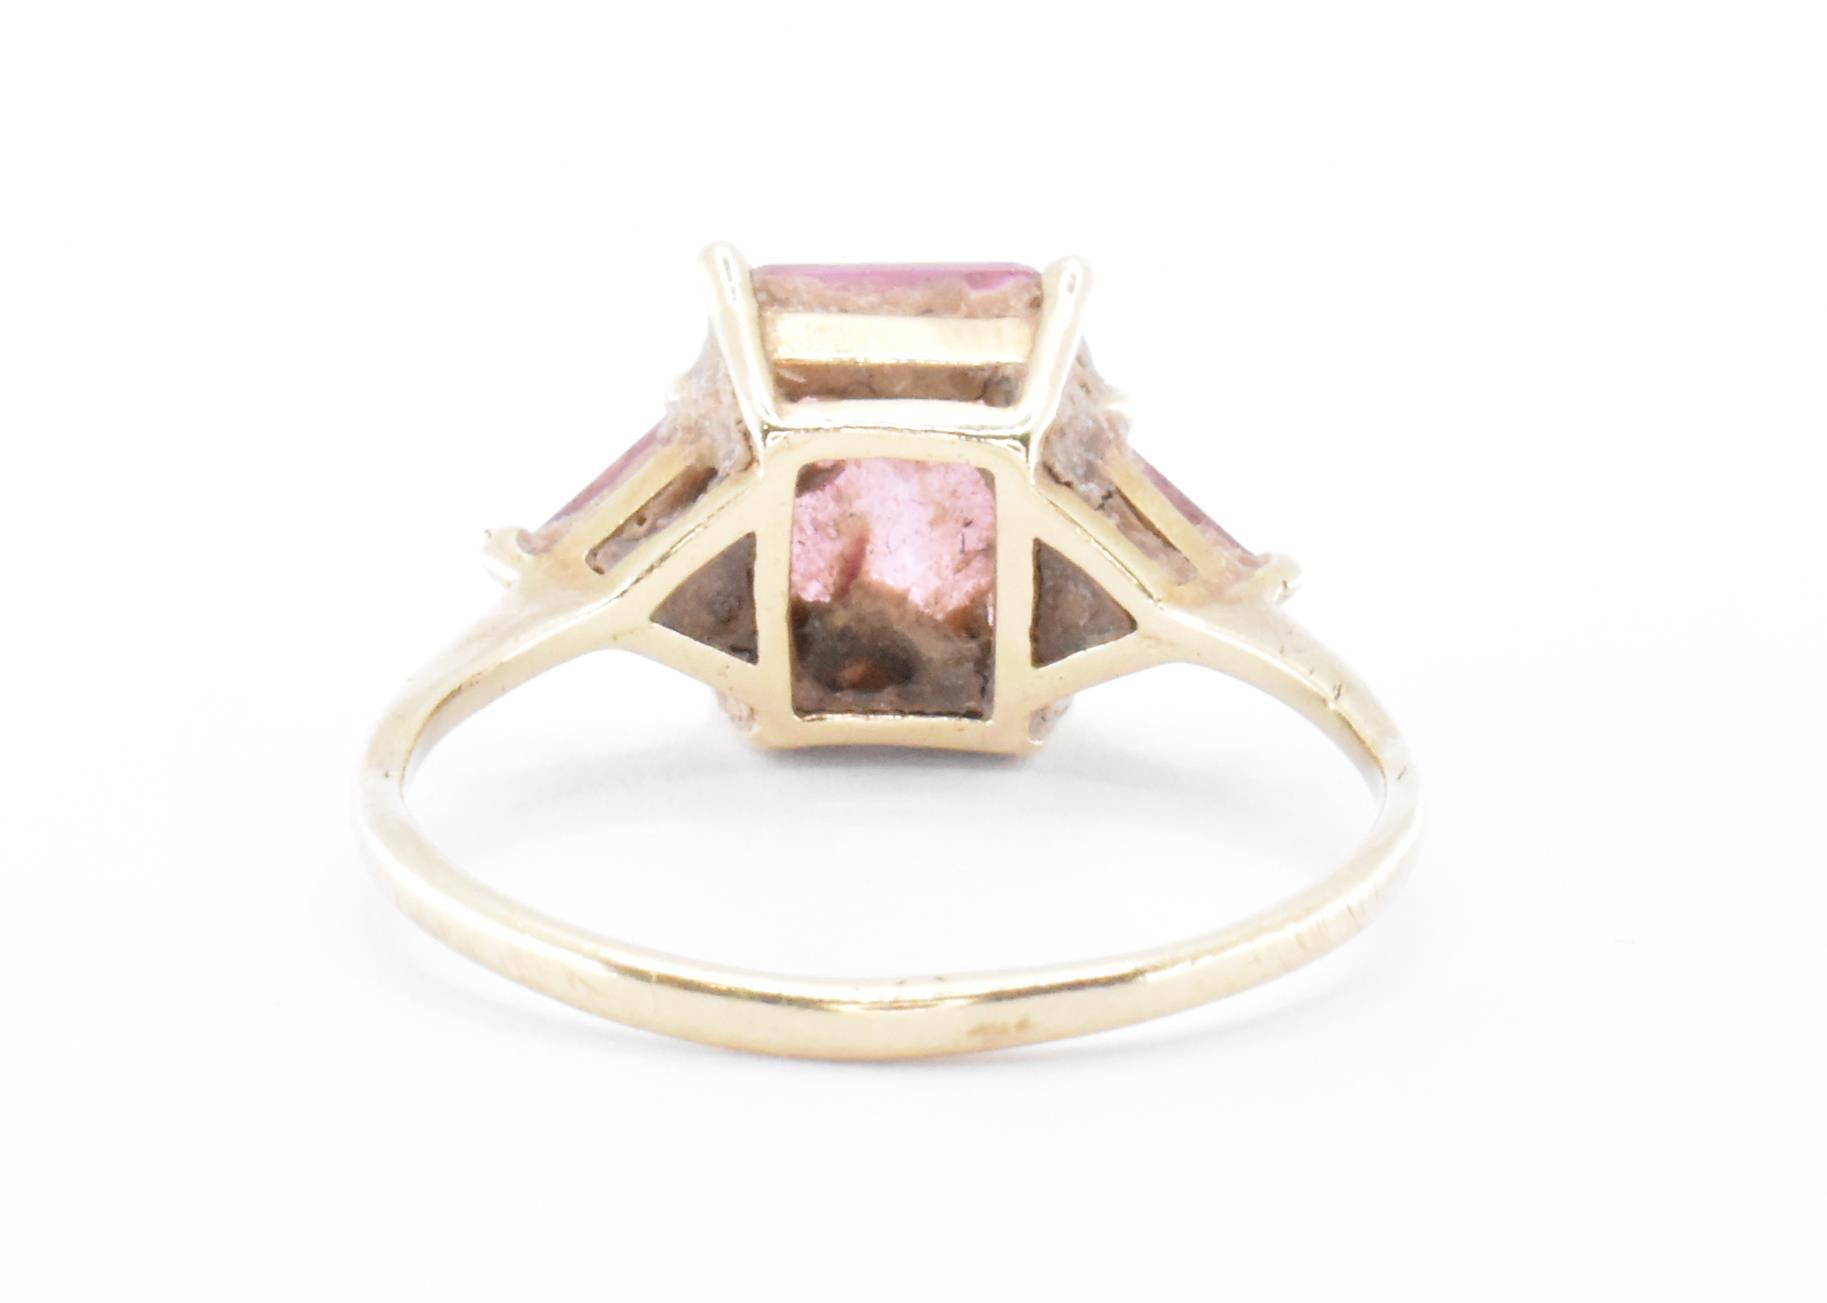 HALLMARKED 9CT GOLD & PINK STONE RING - Image 3 of 4